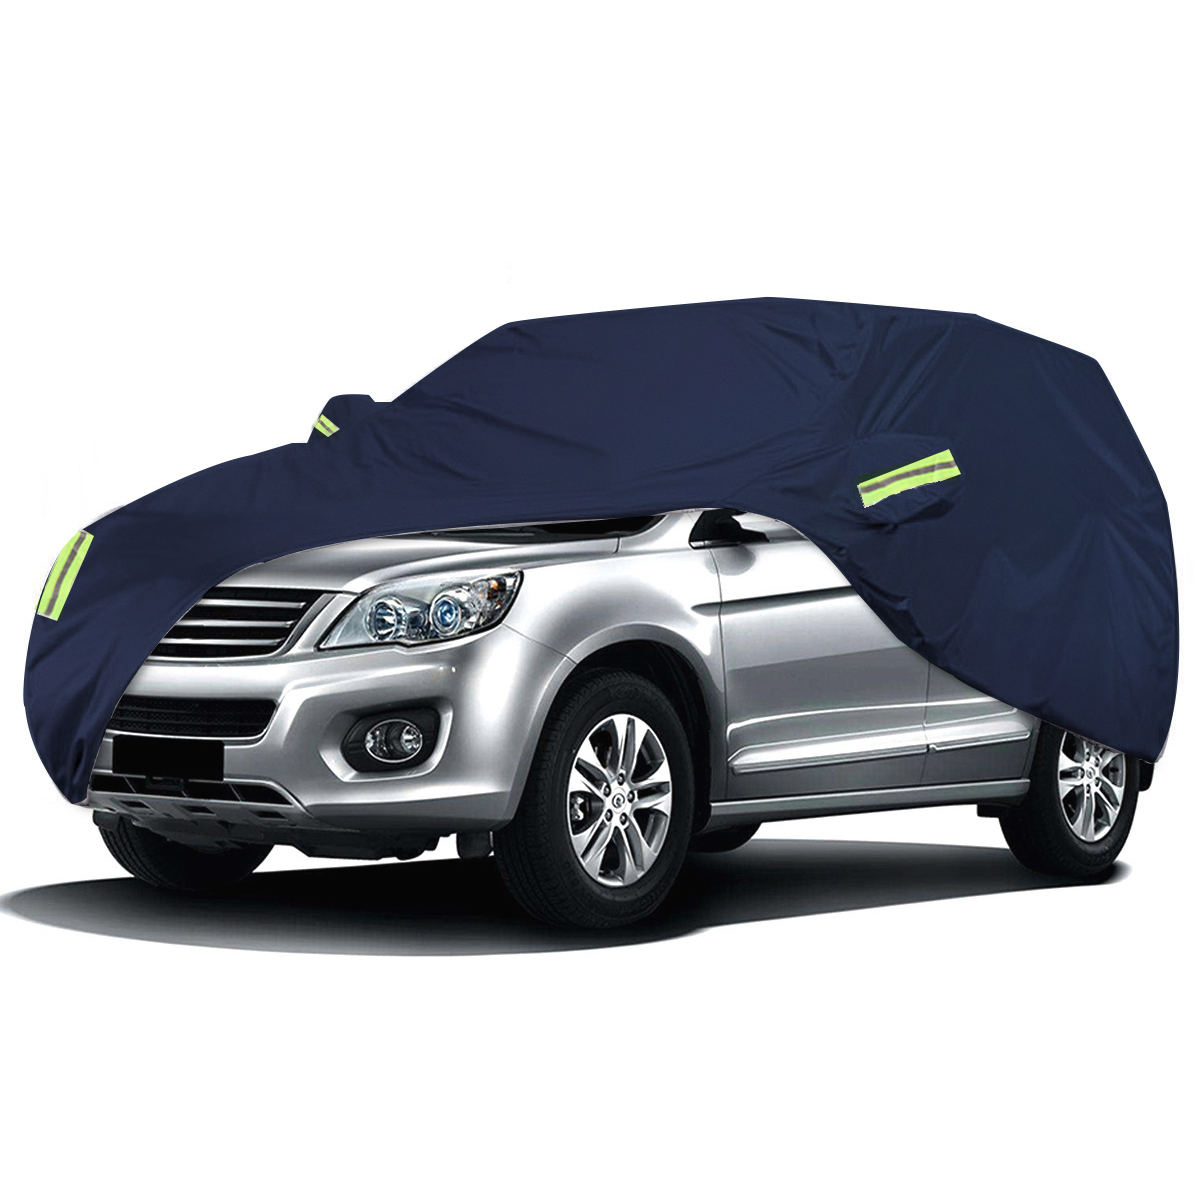 XL 5X2X1.85M 210T Single Layer Waterproof Full Car Cover Outdoor Dustproof Sunscreen Rain and Snow for SUV